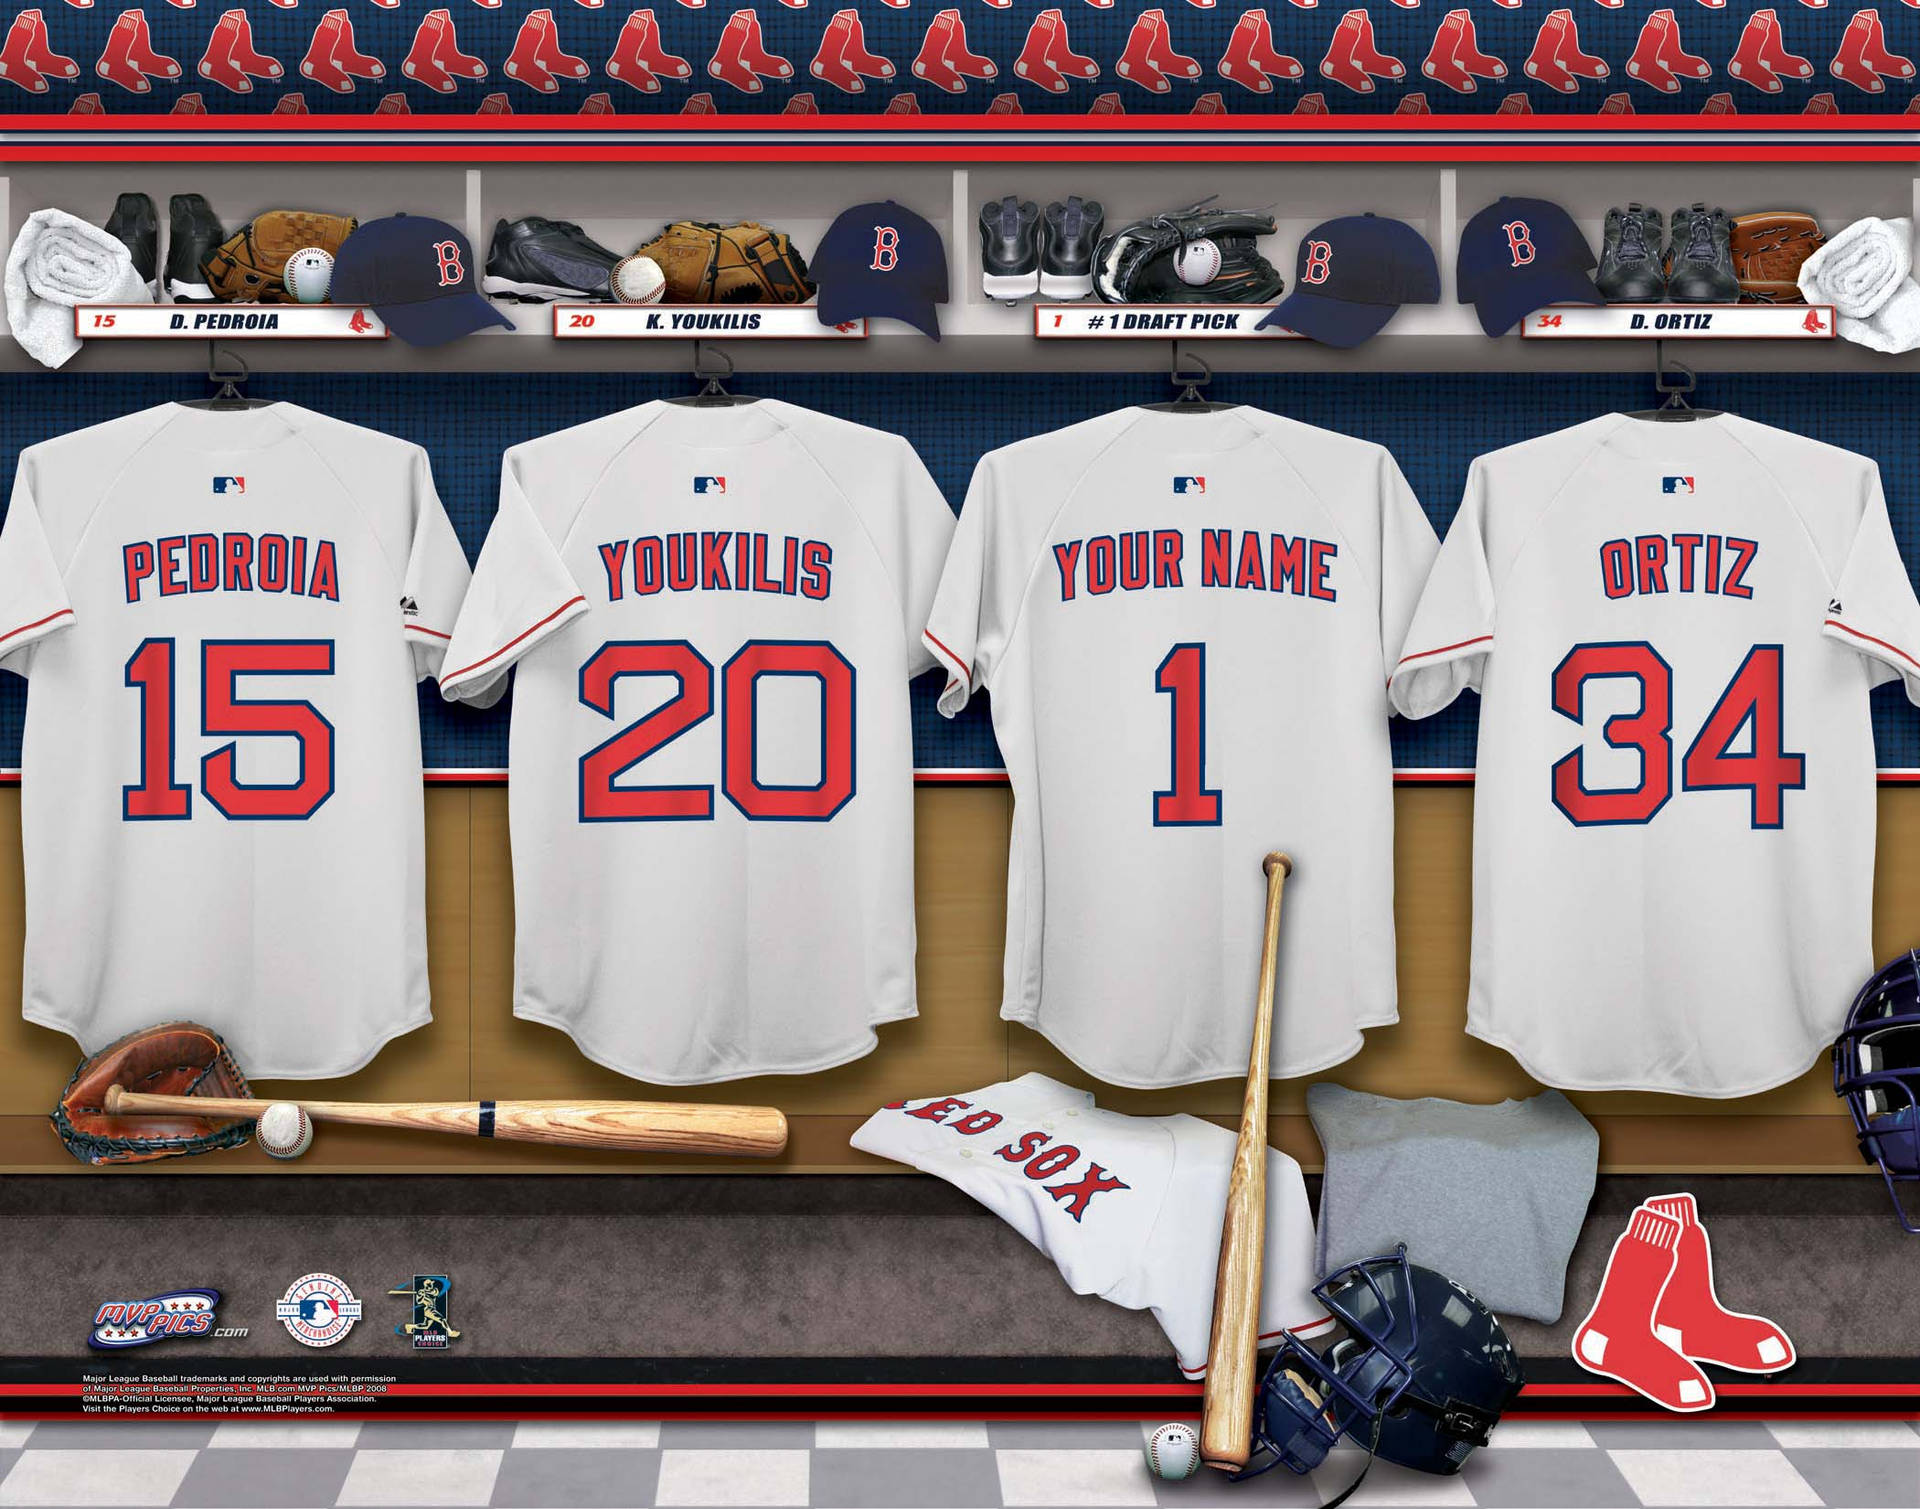 Red Sox Jerseys Background